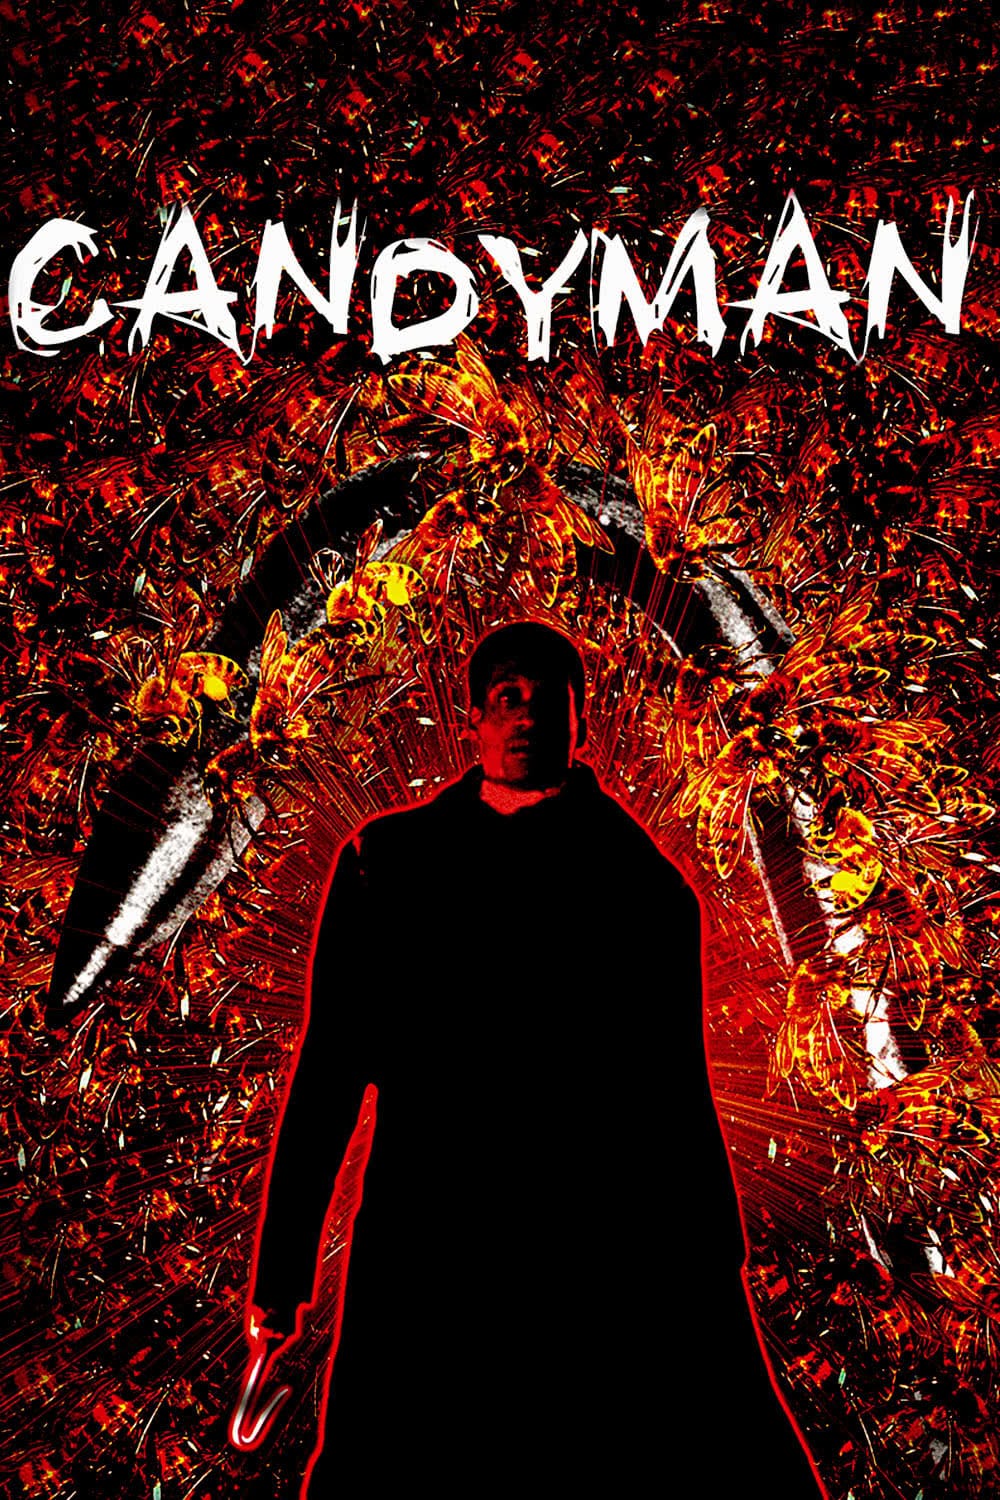 Beetlejuice + Candyman  Double Feature